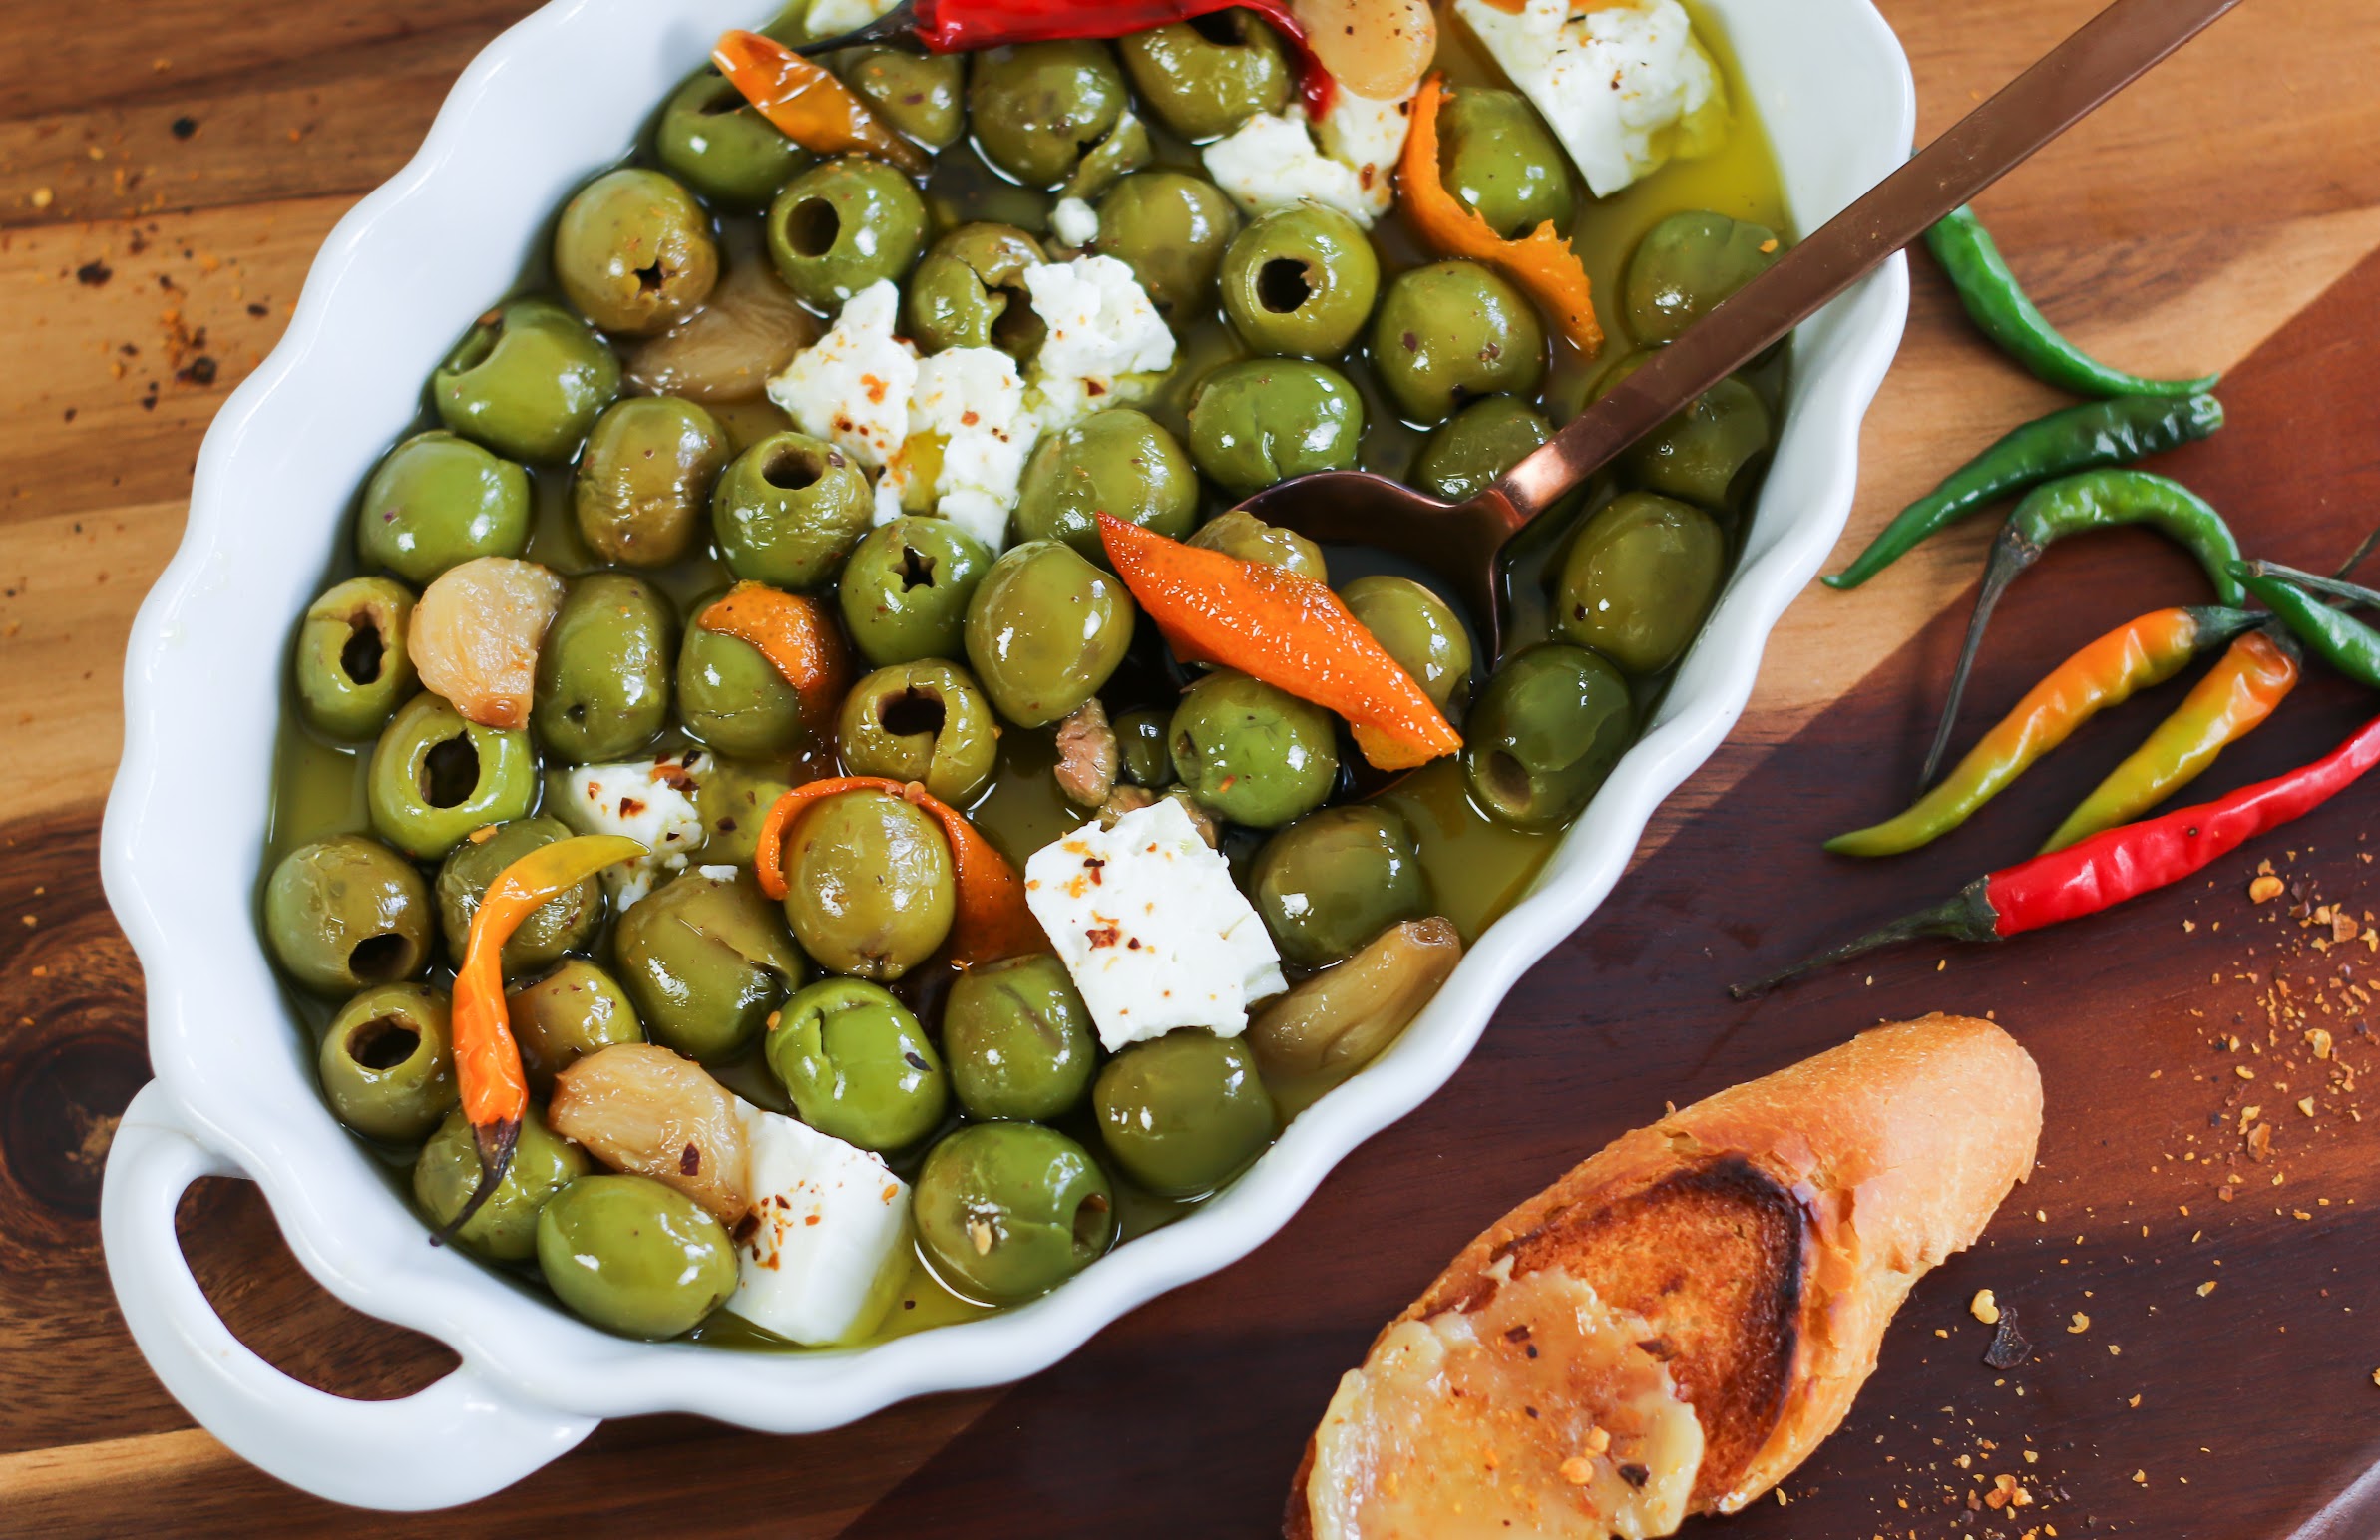 A bowl of olives and other vegetables on a table.